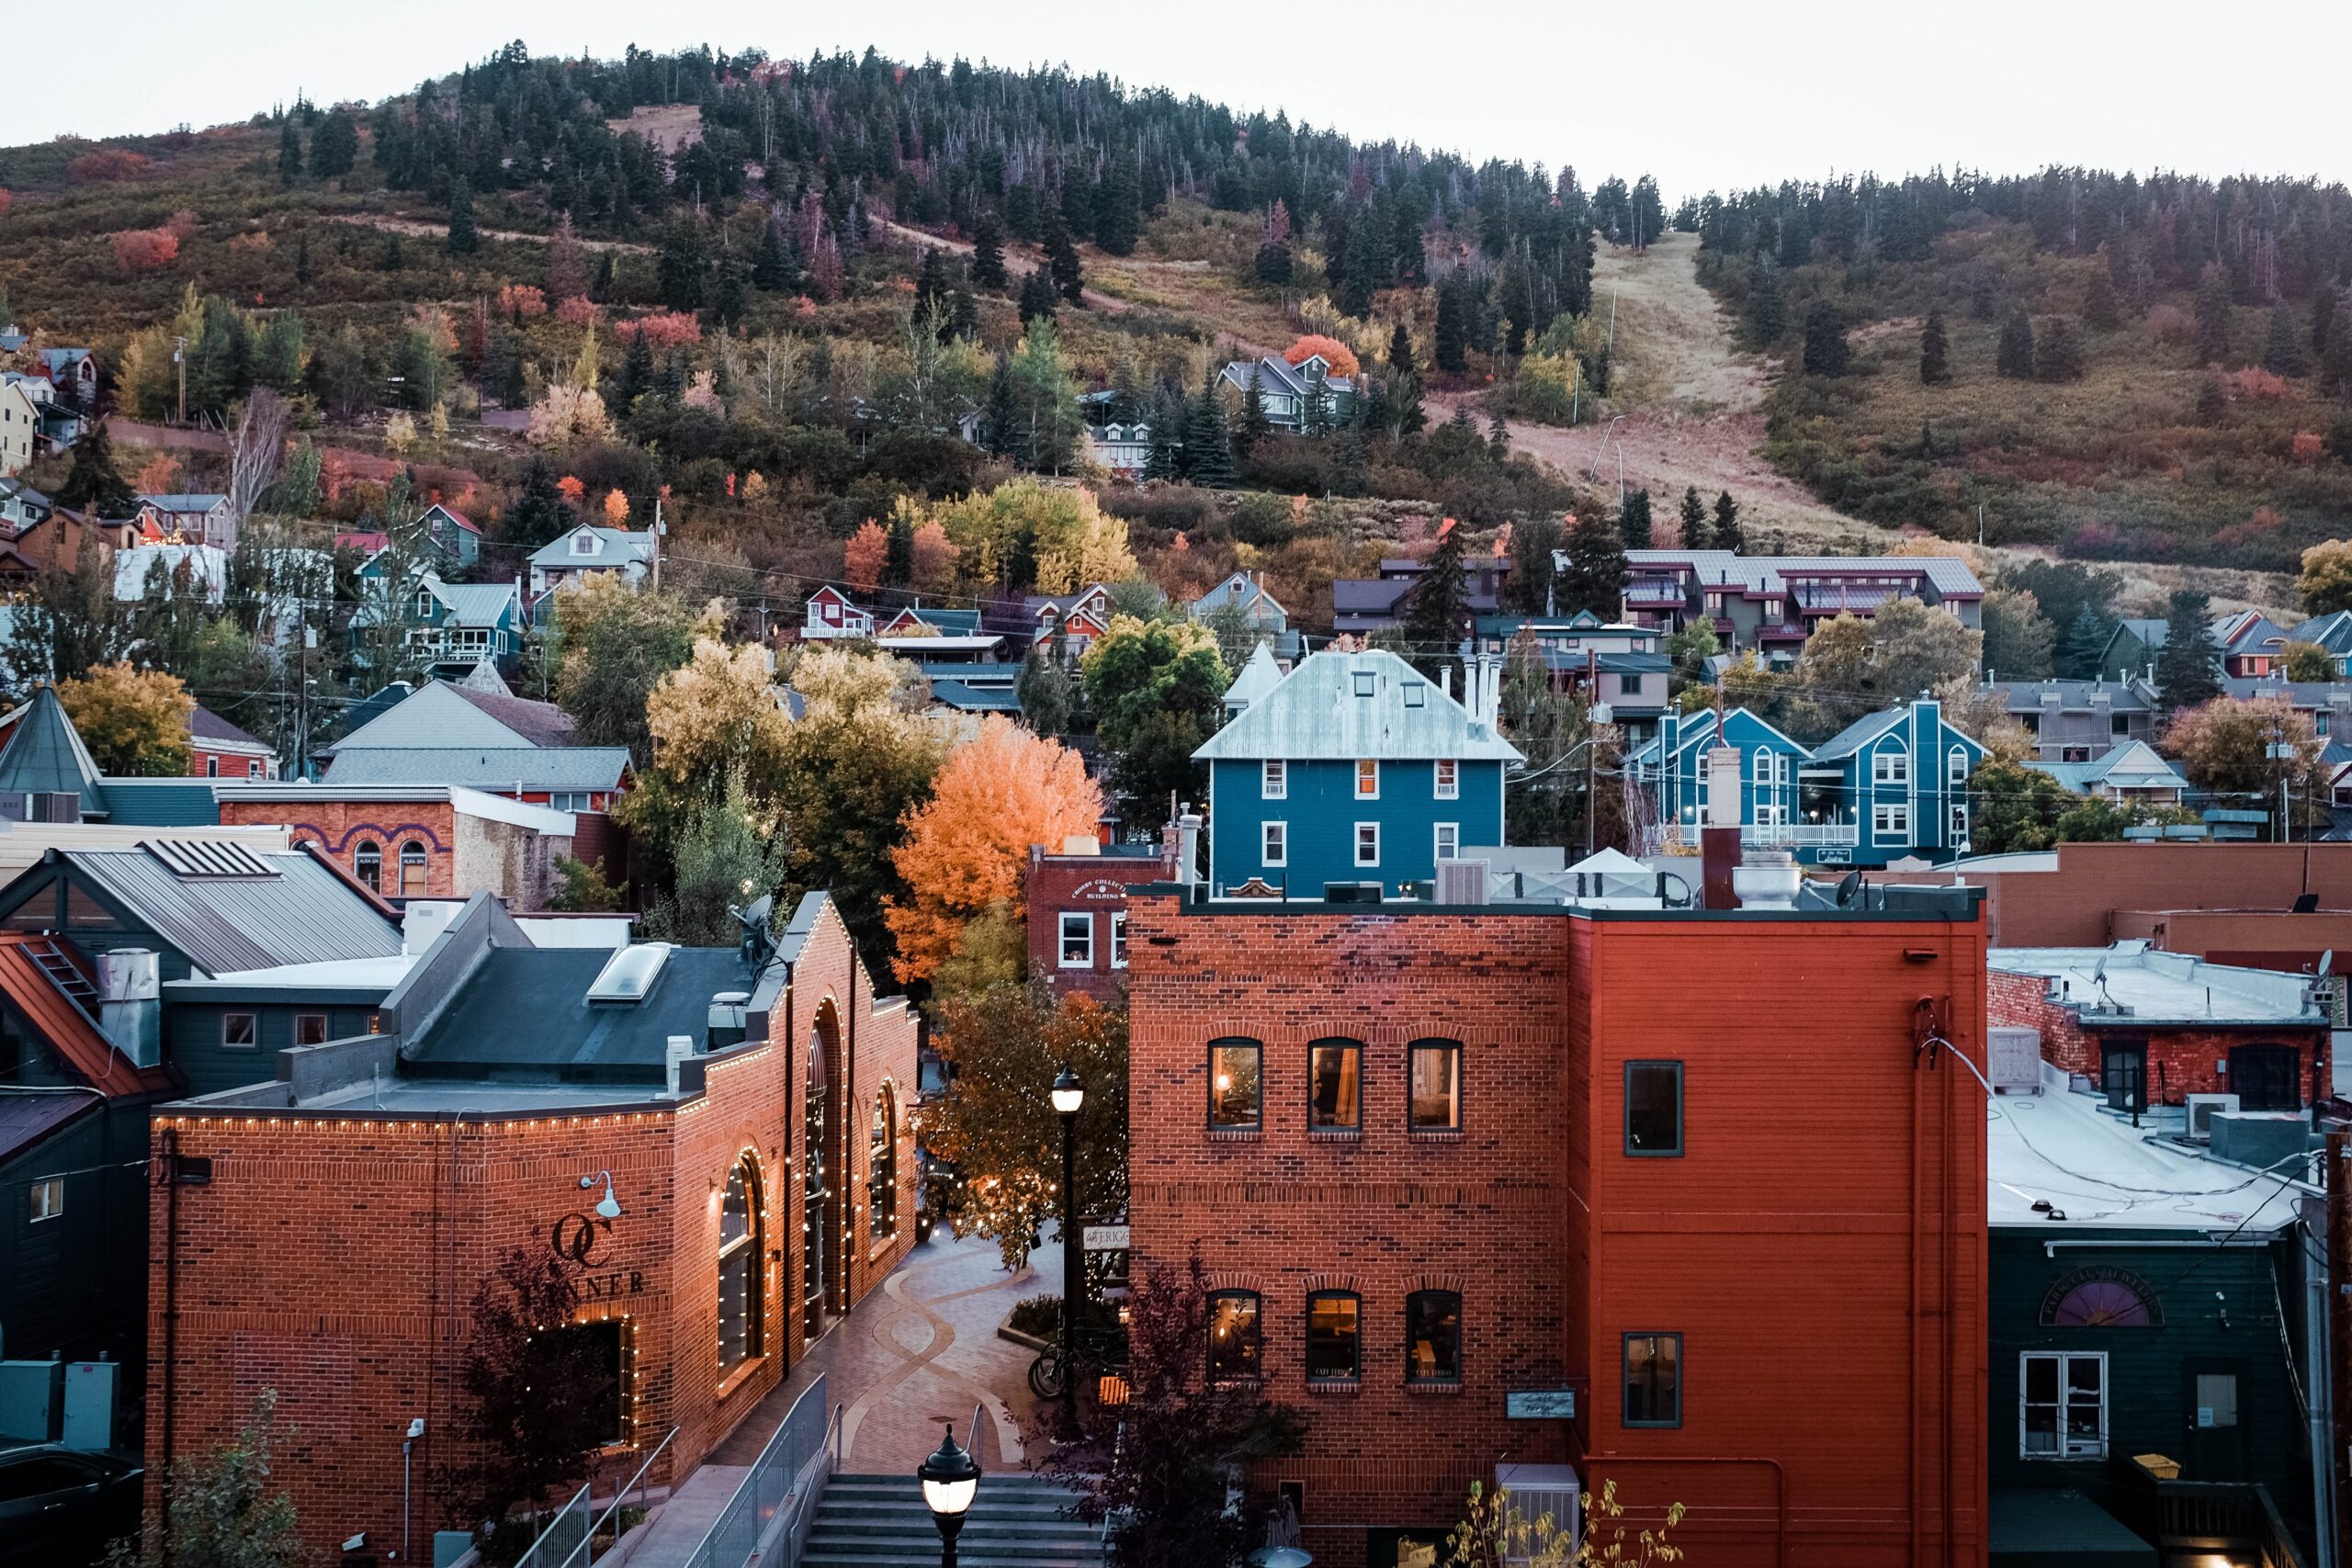 An Autumnal look a section of Park City, UT that rises up a forested hill.